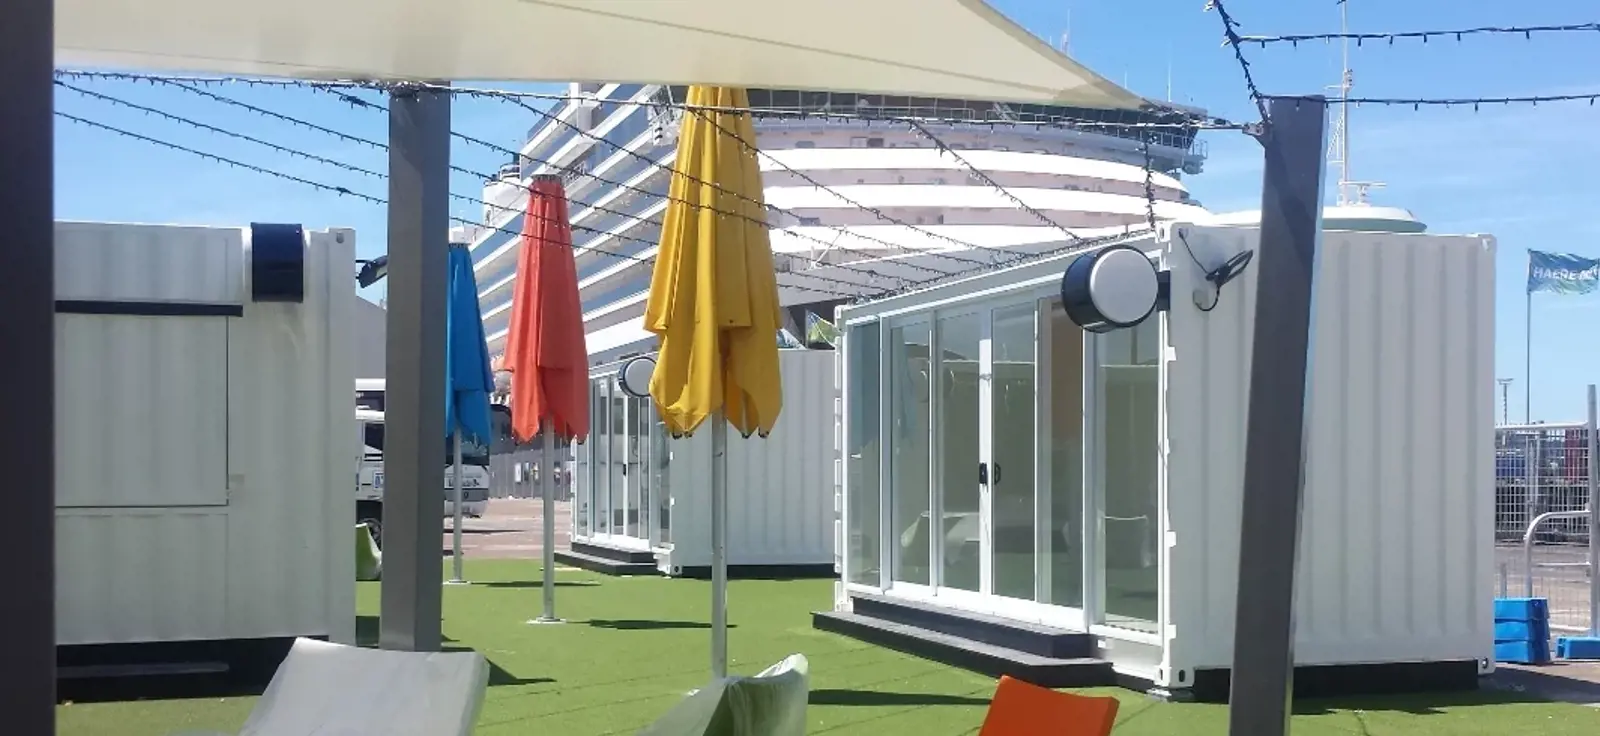 Pop Up Village Starts To Take Shape On Queens Wharf